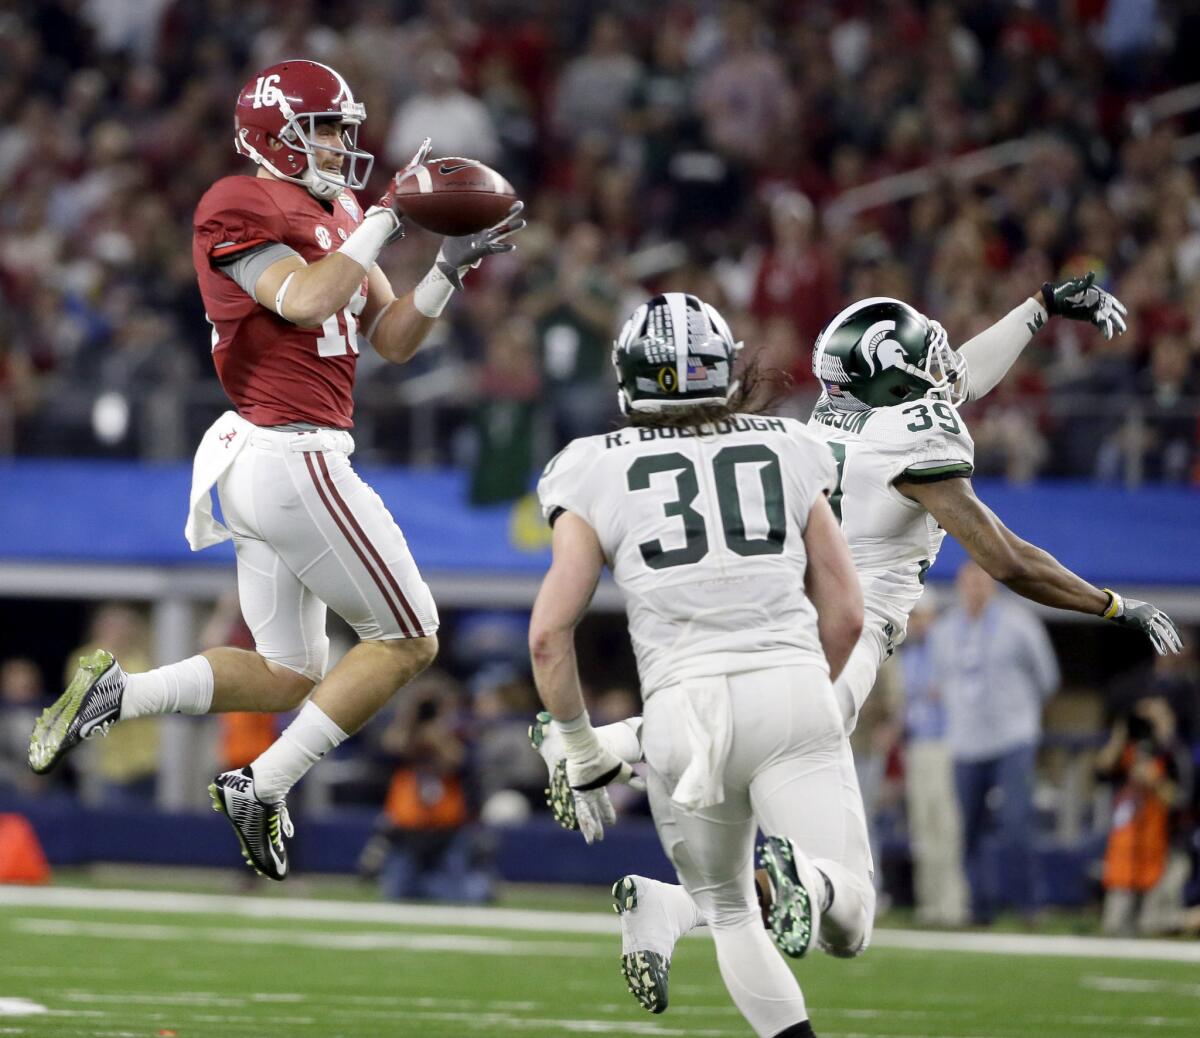 Alabama receiver Richard Mullaney makes a catch over Michigan State linebacker Riley Bullough (30) and cornerback Jermaine Edmondson (39) during the first half of the Cotton Bowl on Dec. 31.